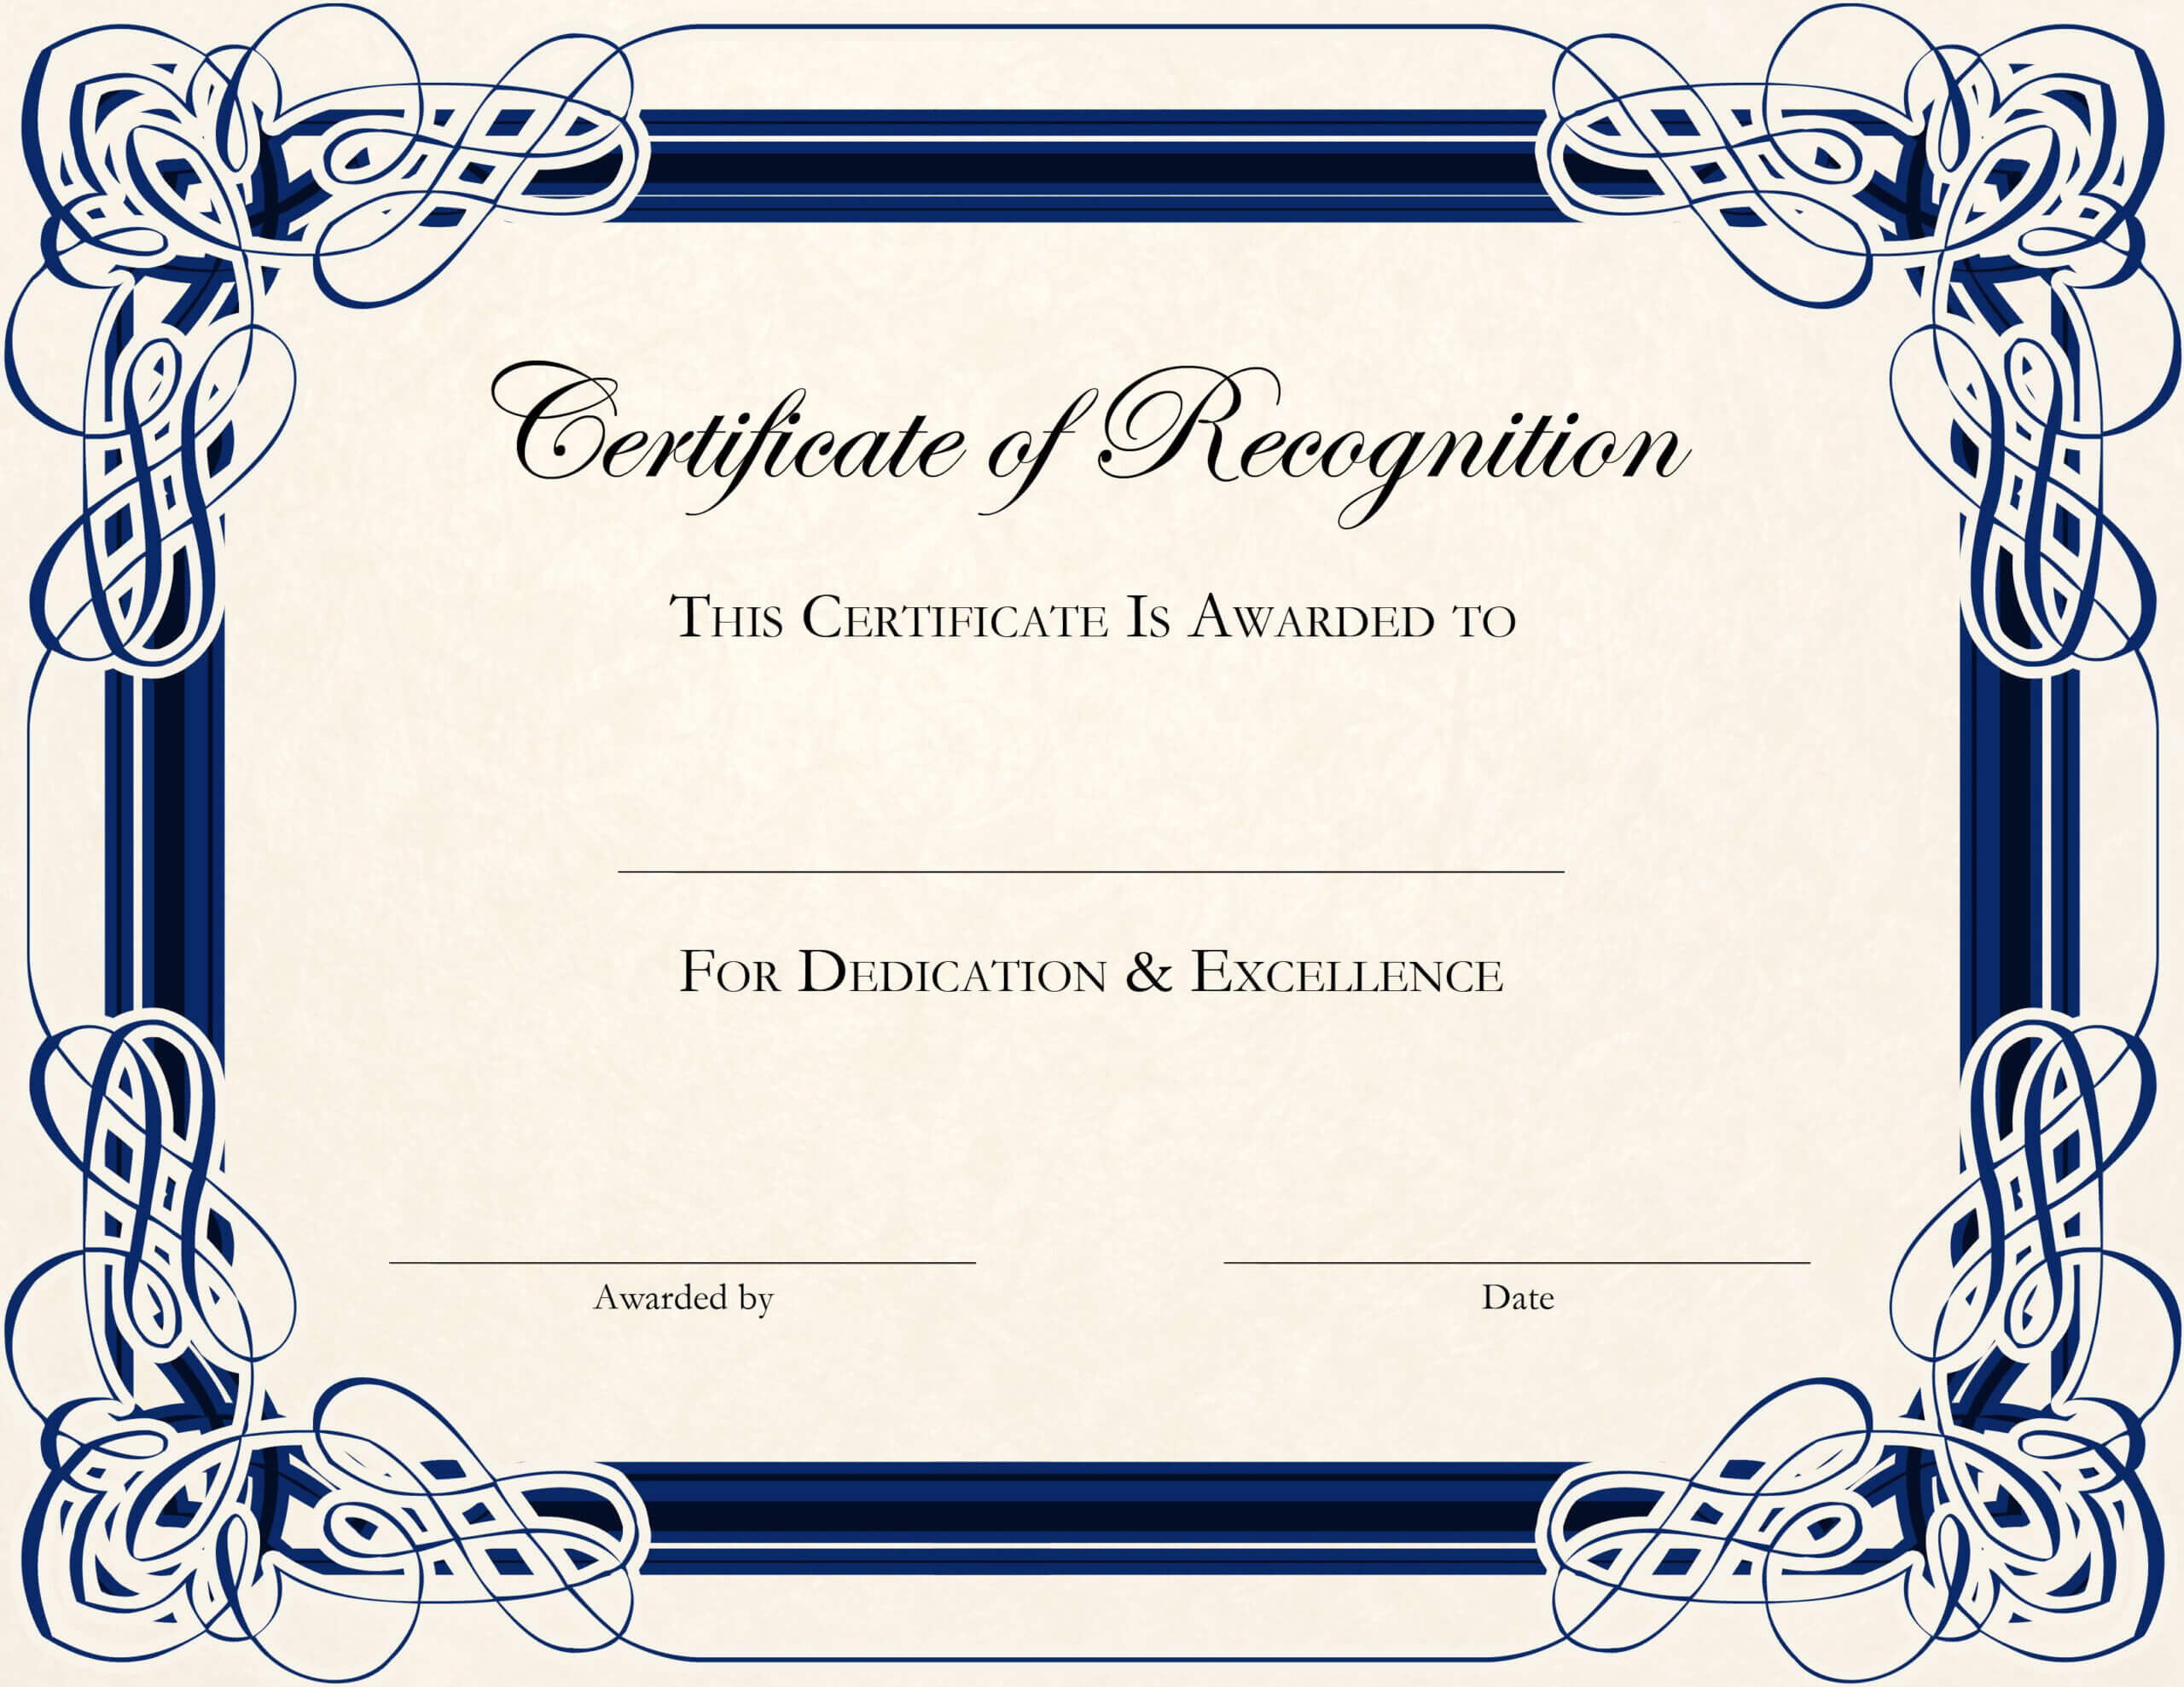 Certificate Template Designs Recognition Docs | Certificate Throughout Free Printable Certificate Border Templates